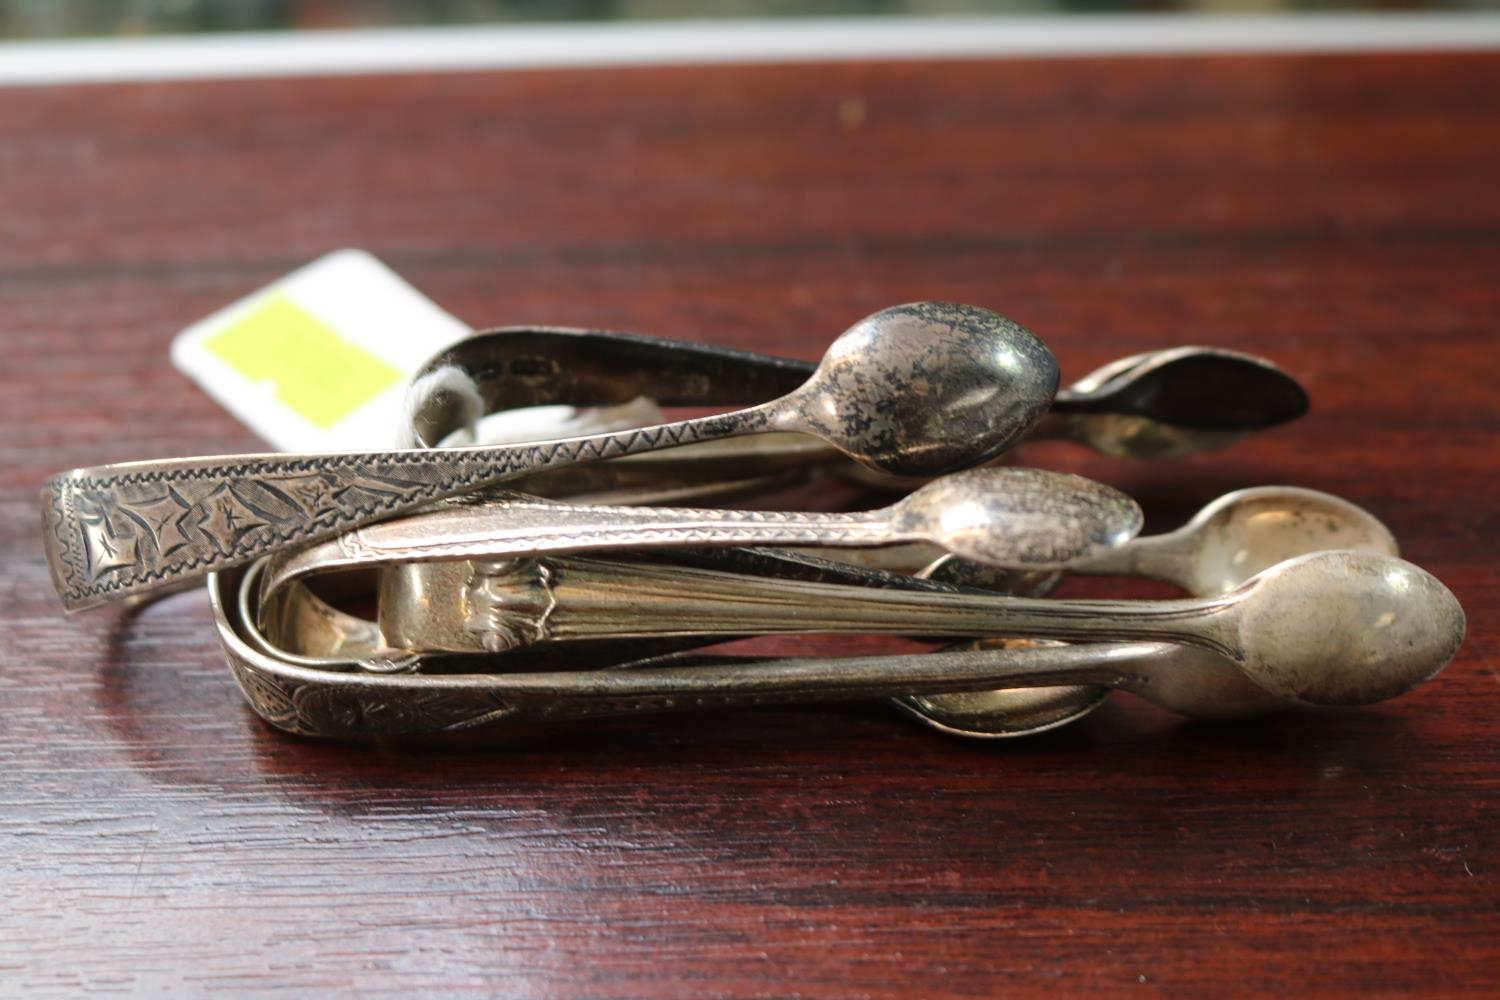 Collection of Six Silver Sugar Tongs 85g total weight